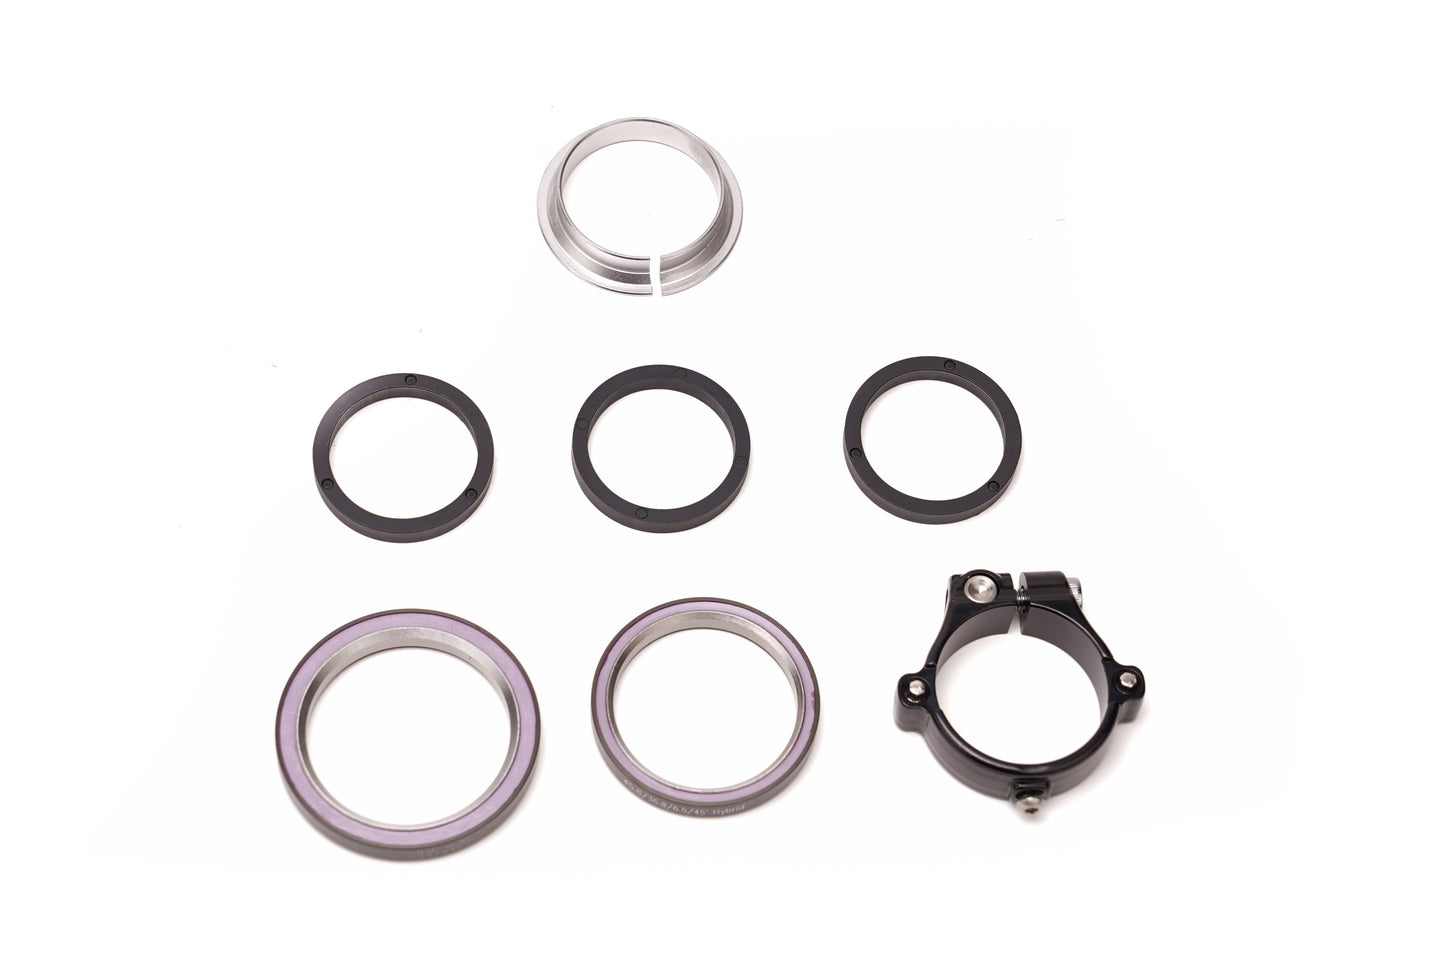 Specialized MY20 Roubaix Upper&Lower Bearings Comp Ring, Collar& Spacer